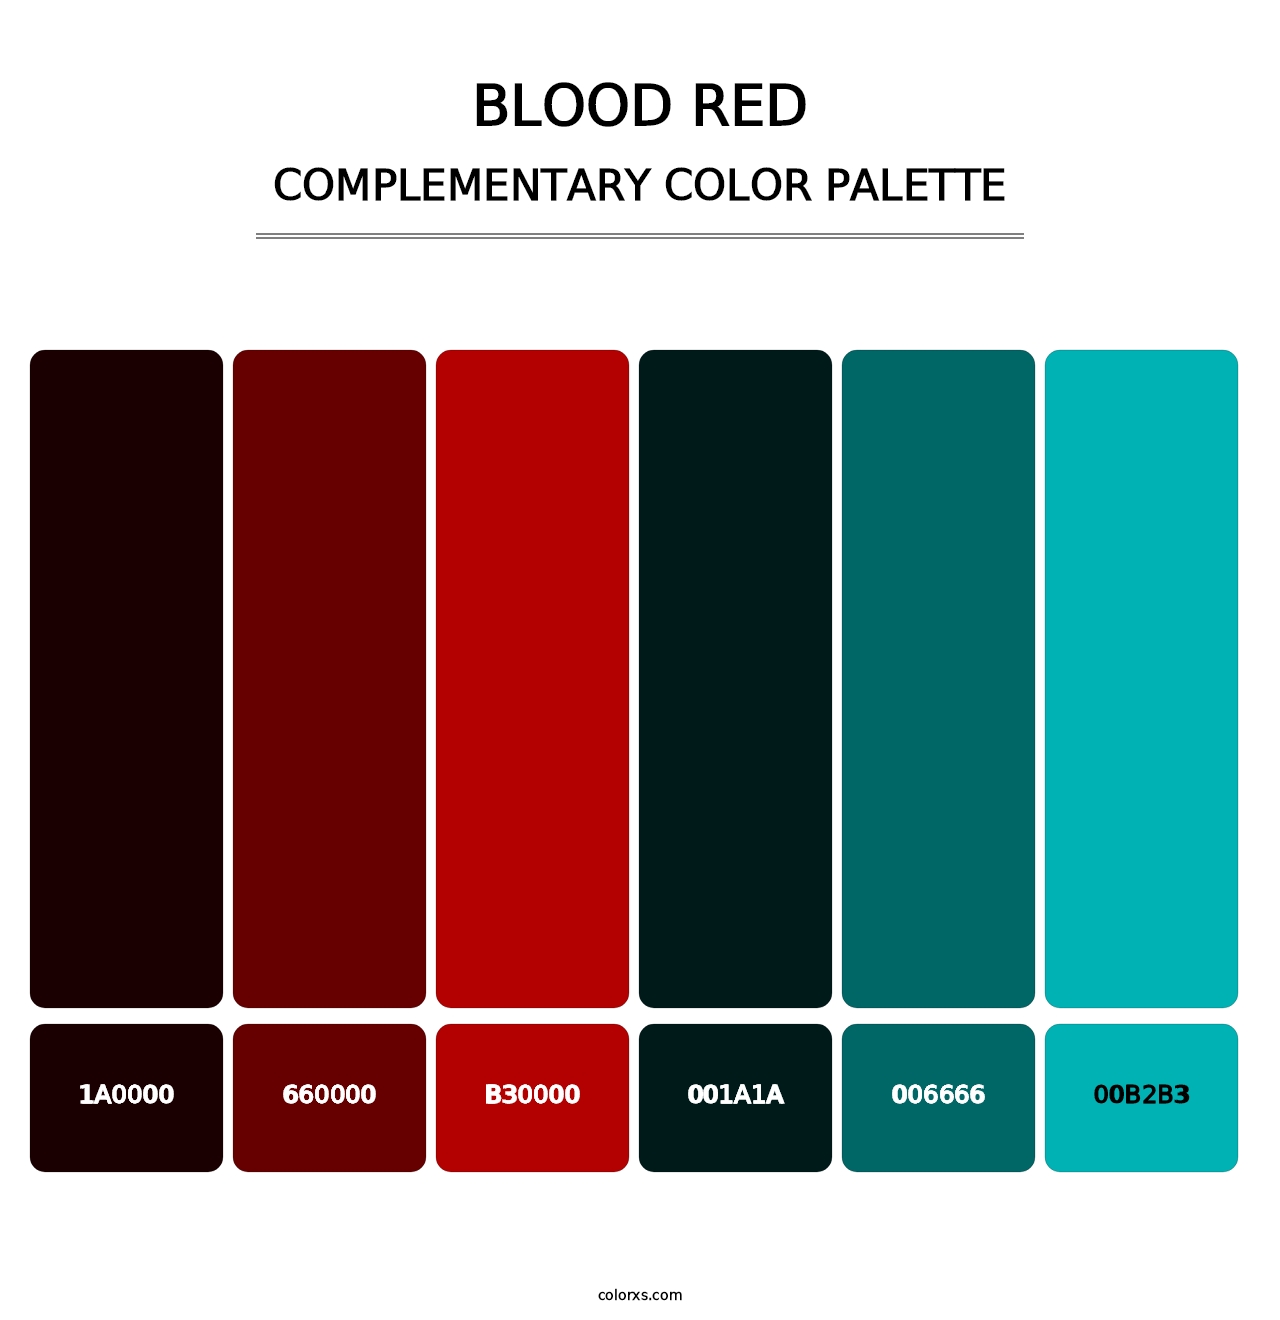 Blood Red - Complementary Color Palette